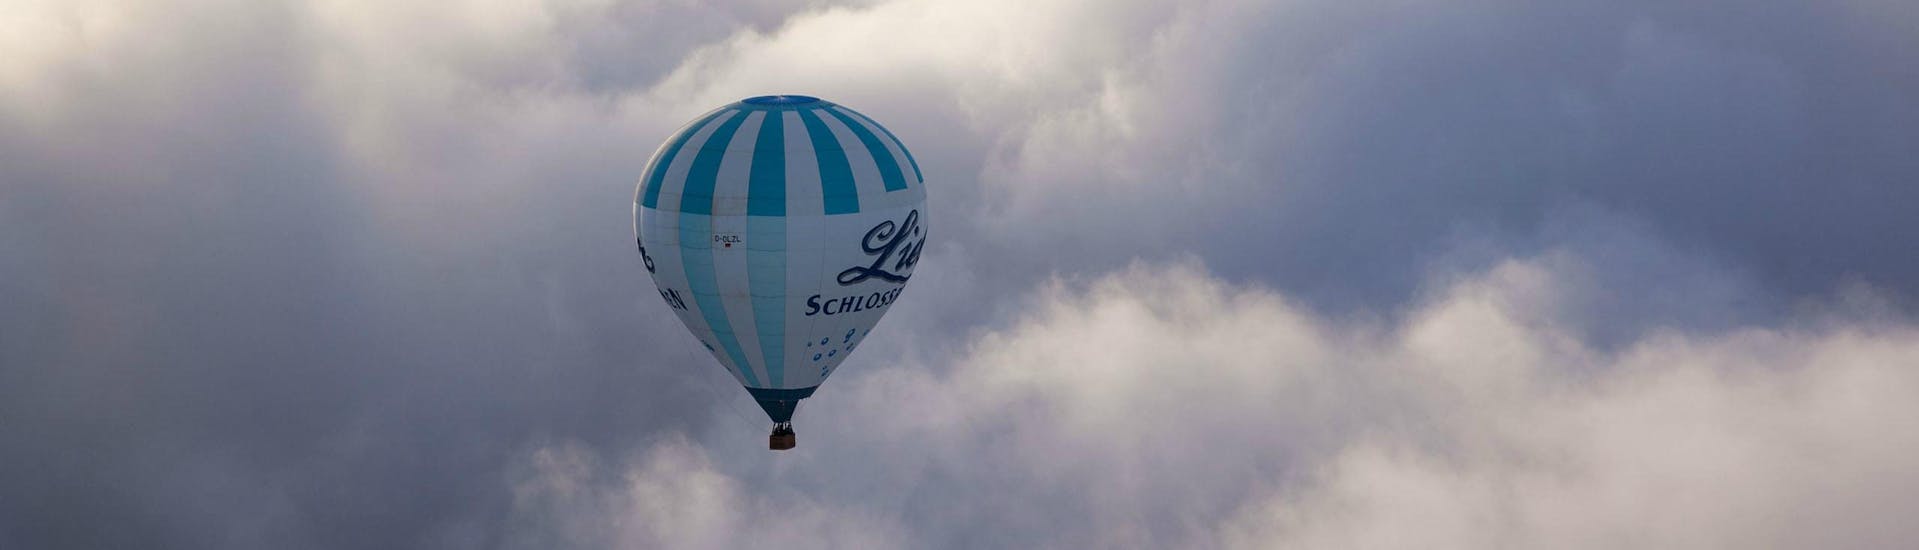 Picture of the balloon used for the Balloon Ride "Engagement & Wedding" - Southern Baden